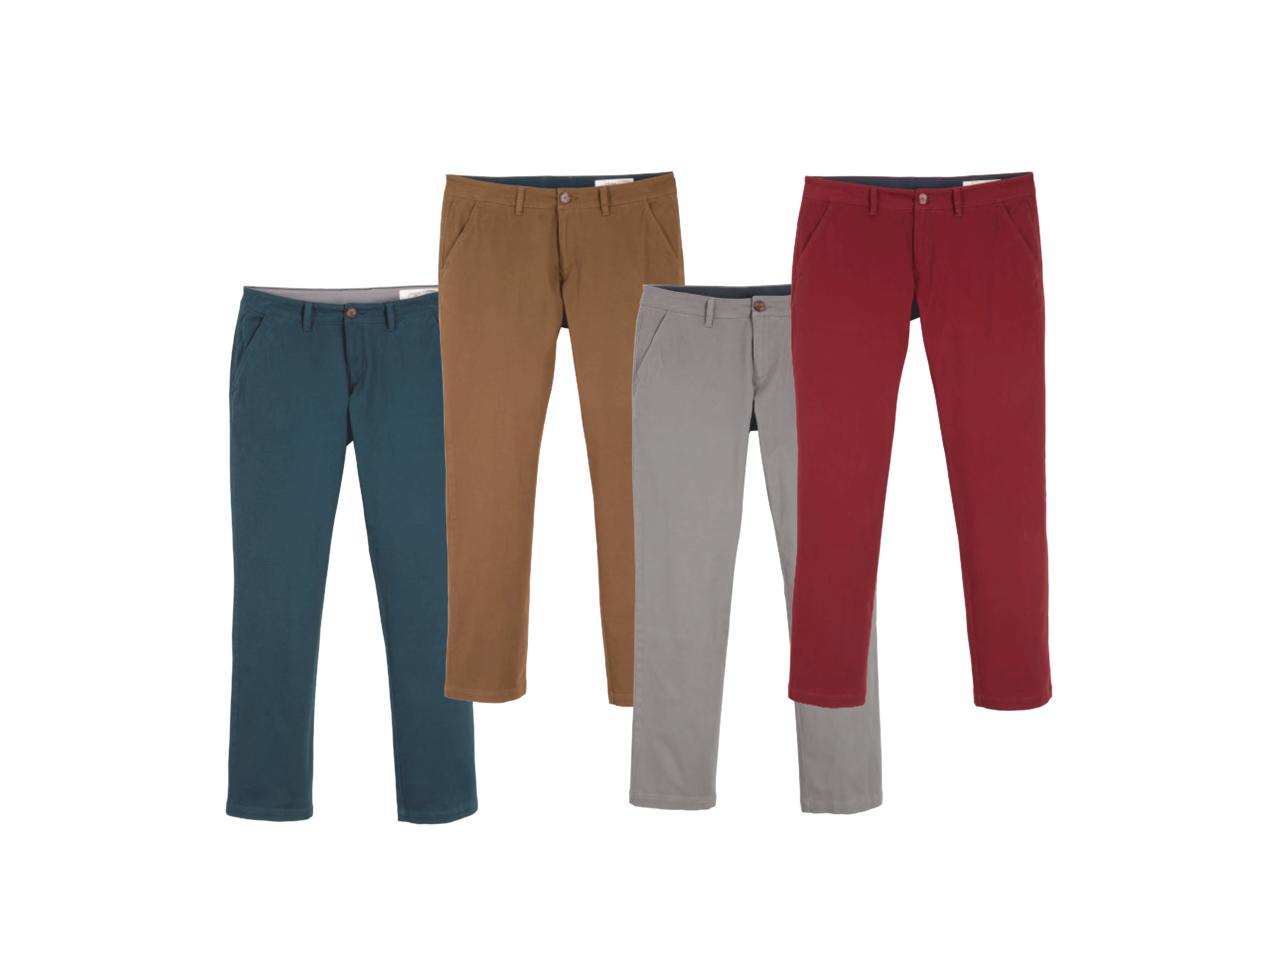 LIVERGY Men's Twill Trousers